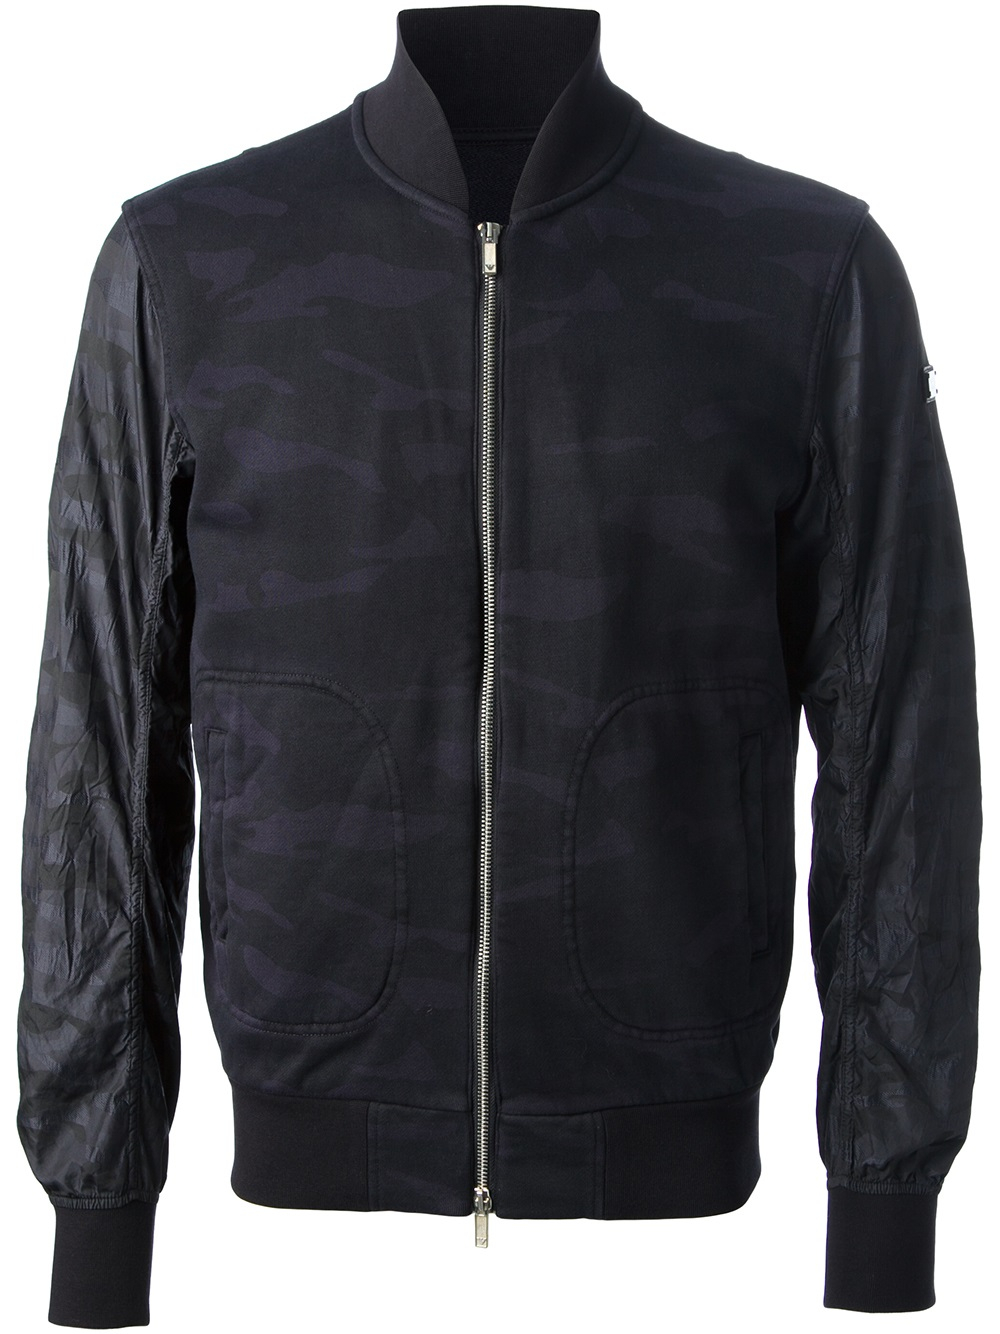 Giorgio Armani Camouflage Bomber Jacket in Blue for Men - Lyst